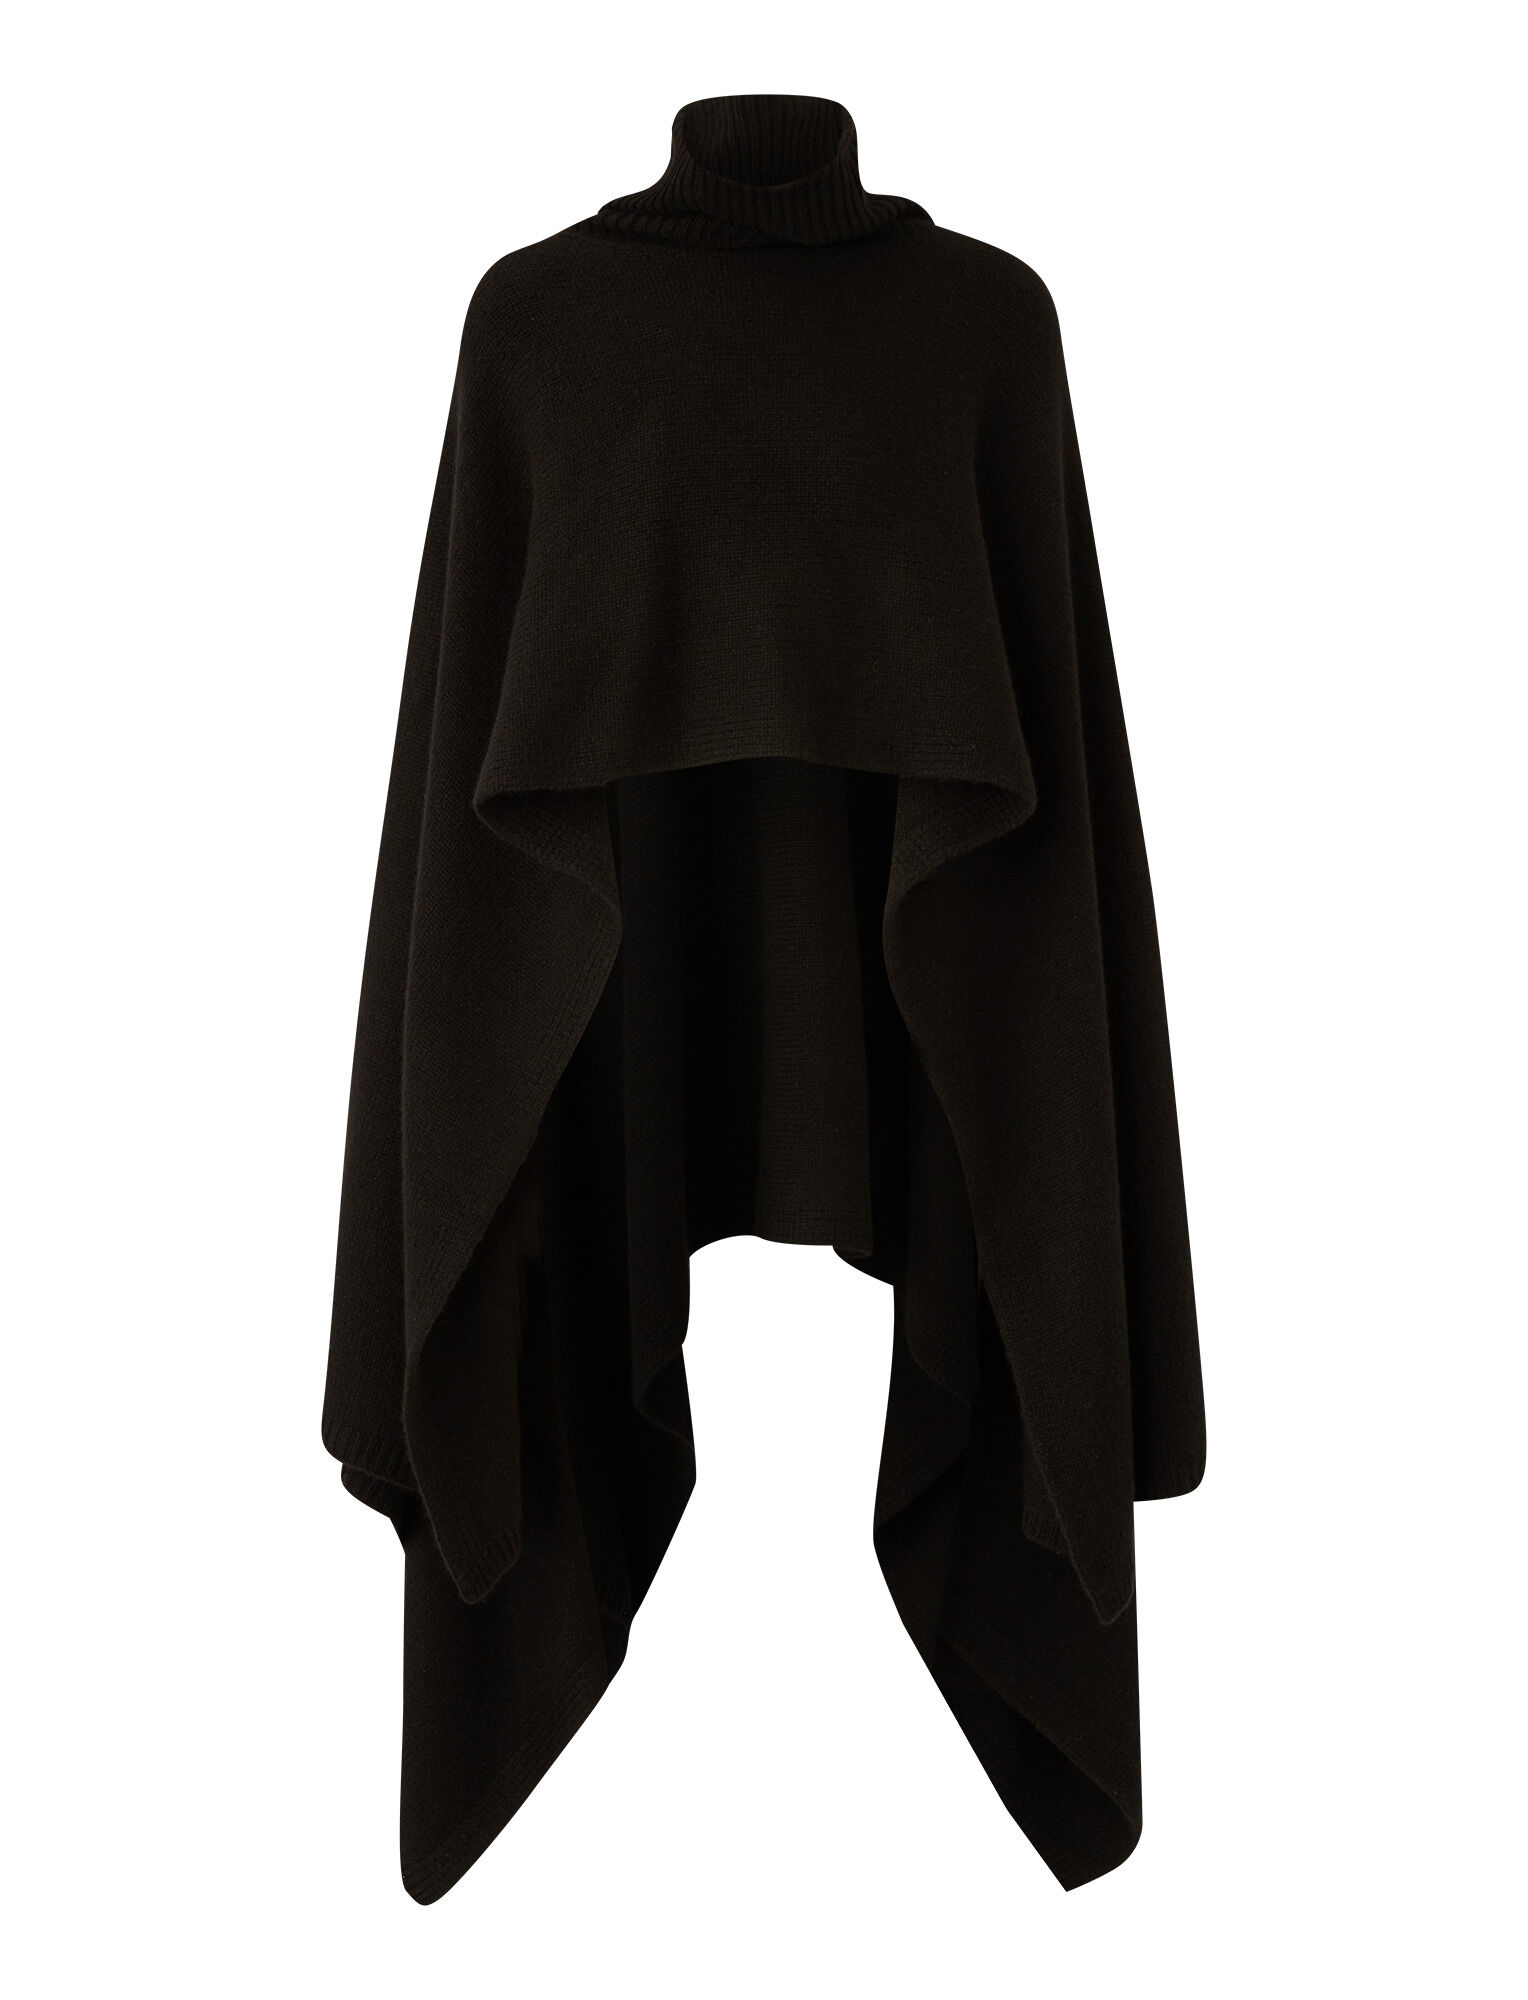 JOSEPH PONCHO LUXE CASHMERE KNIT,jf0048540010one-black-ONE SIZE